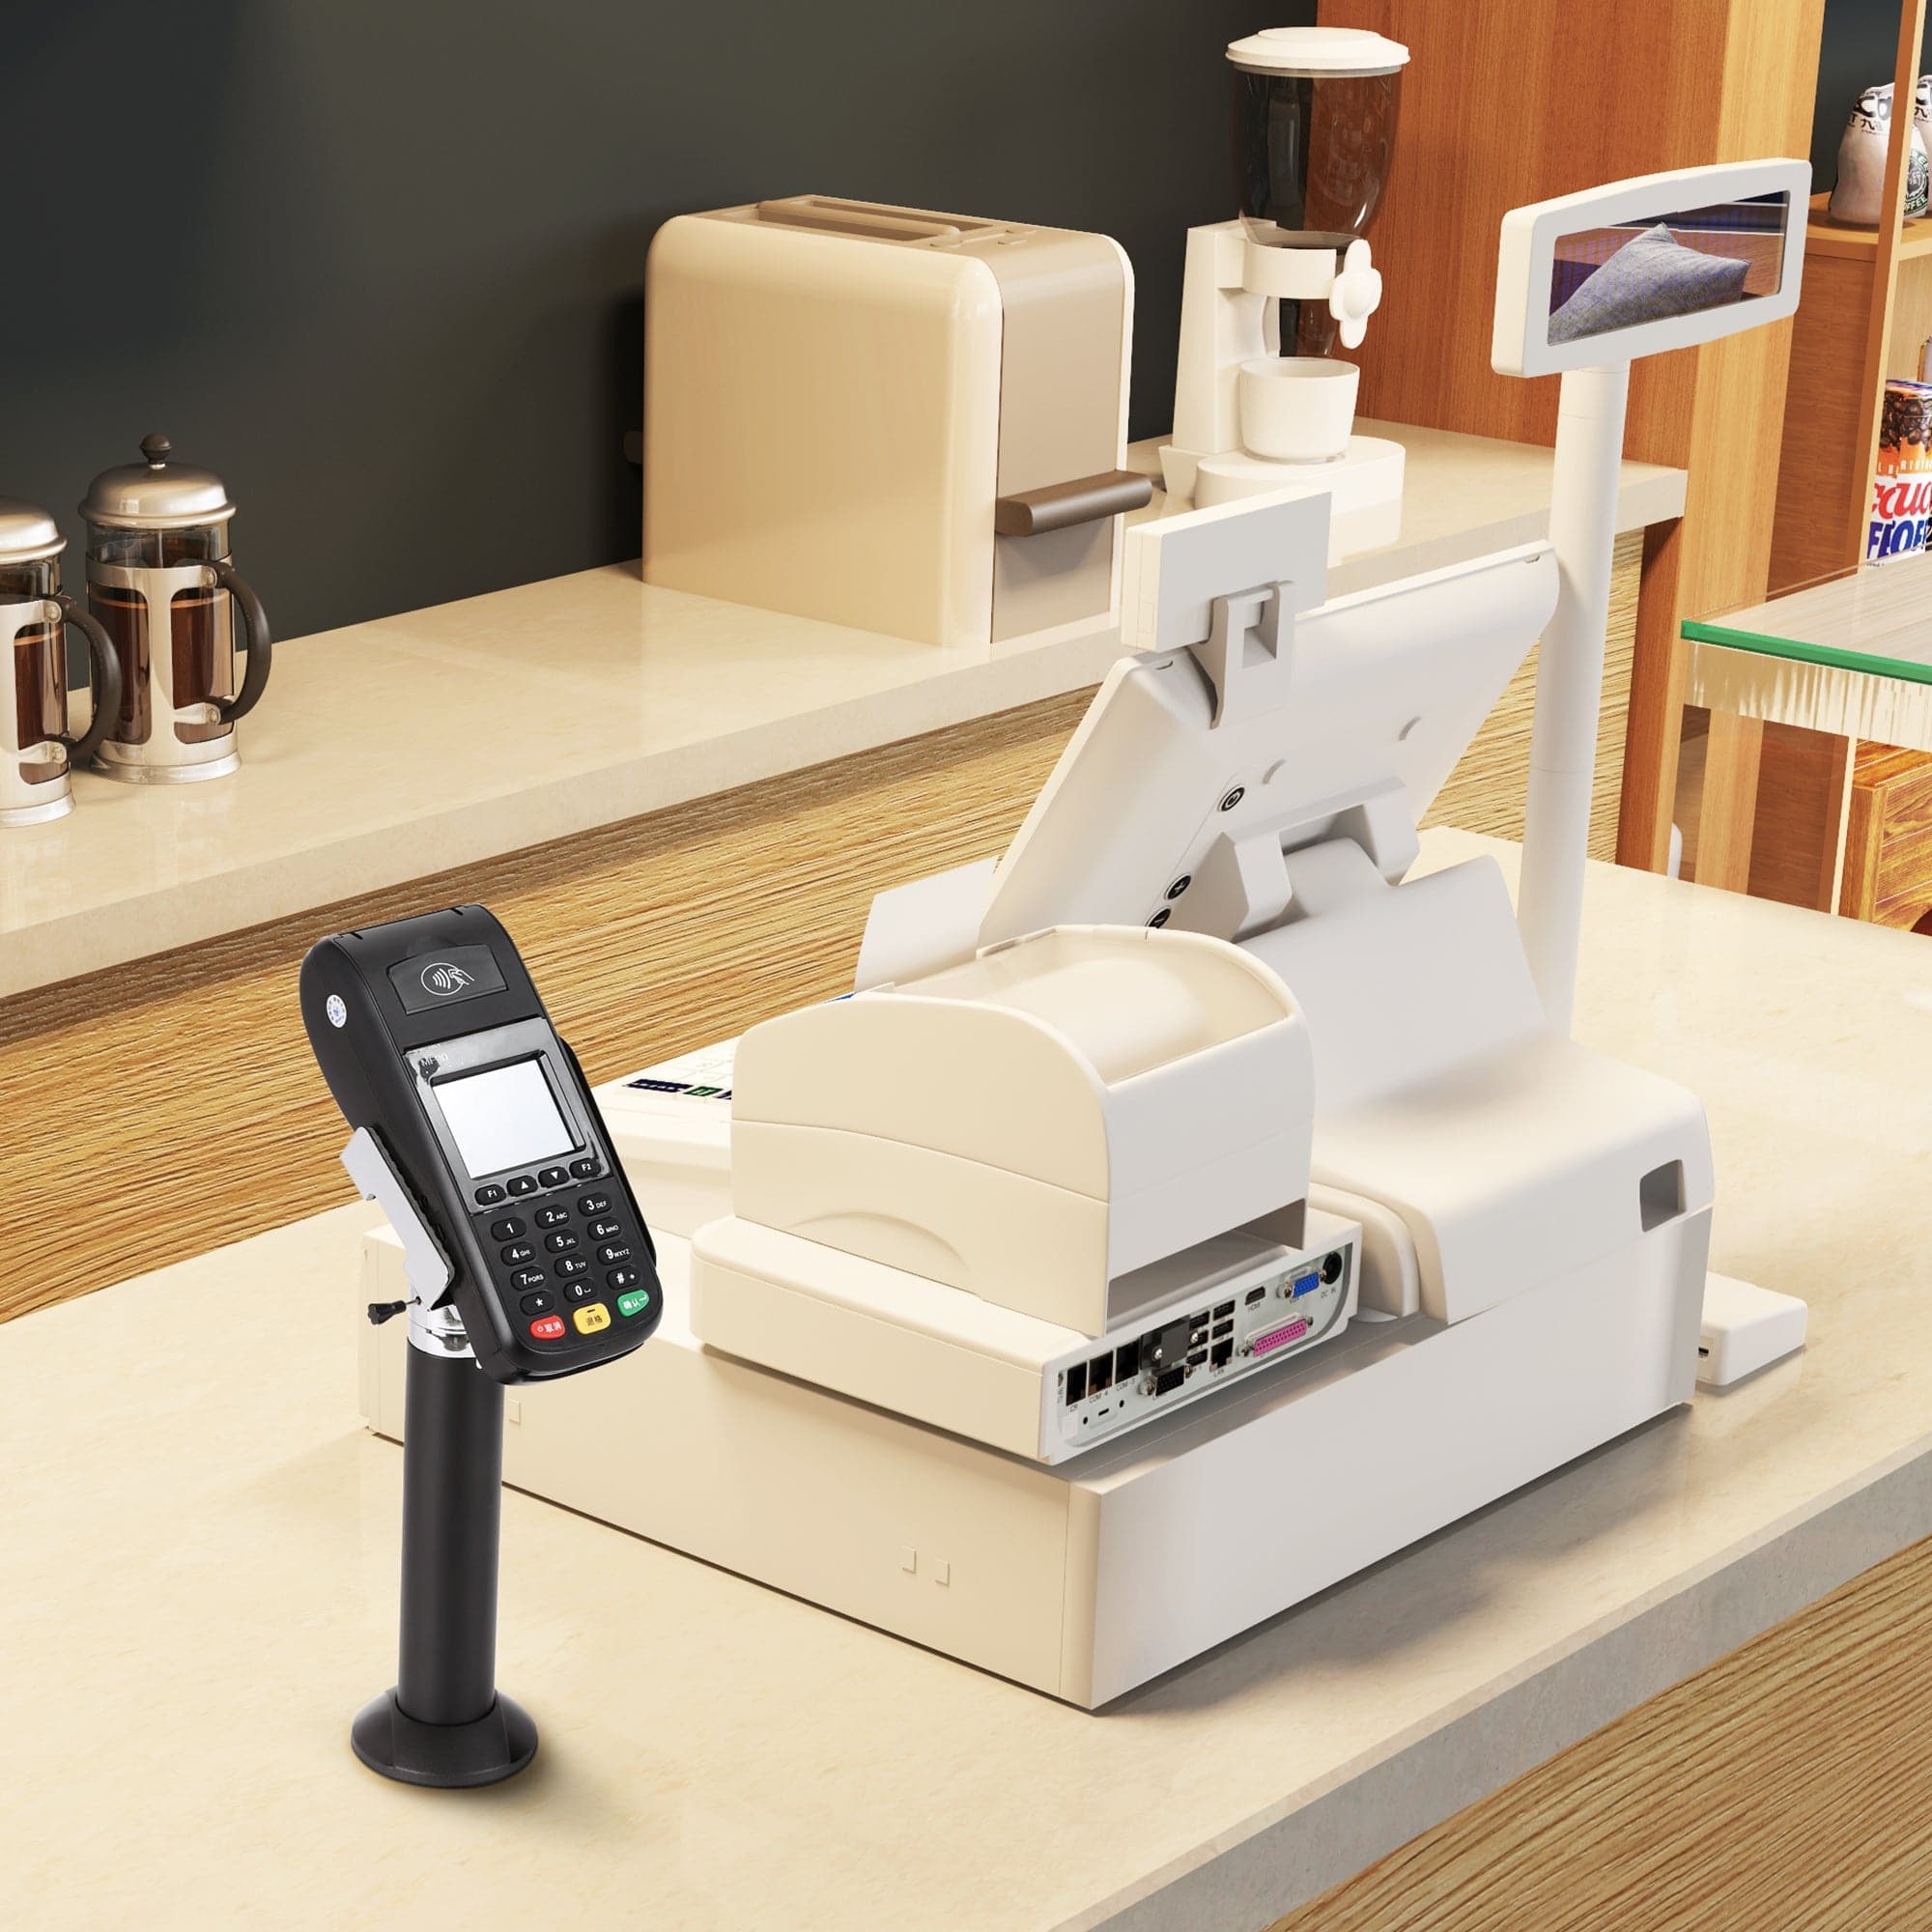 Universal Credit Card POS Terminal Stand - Mount-It!